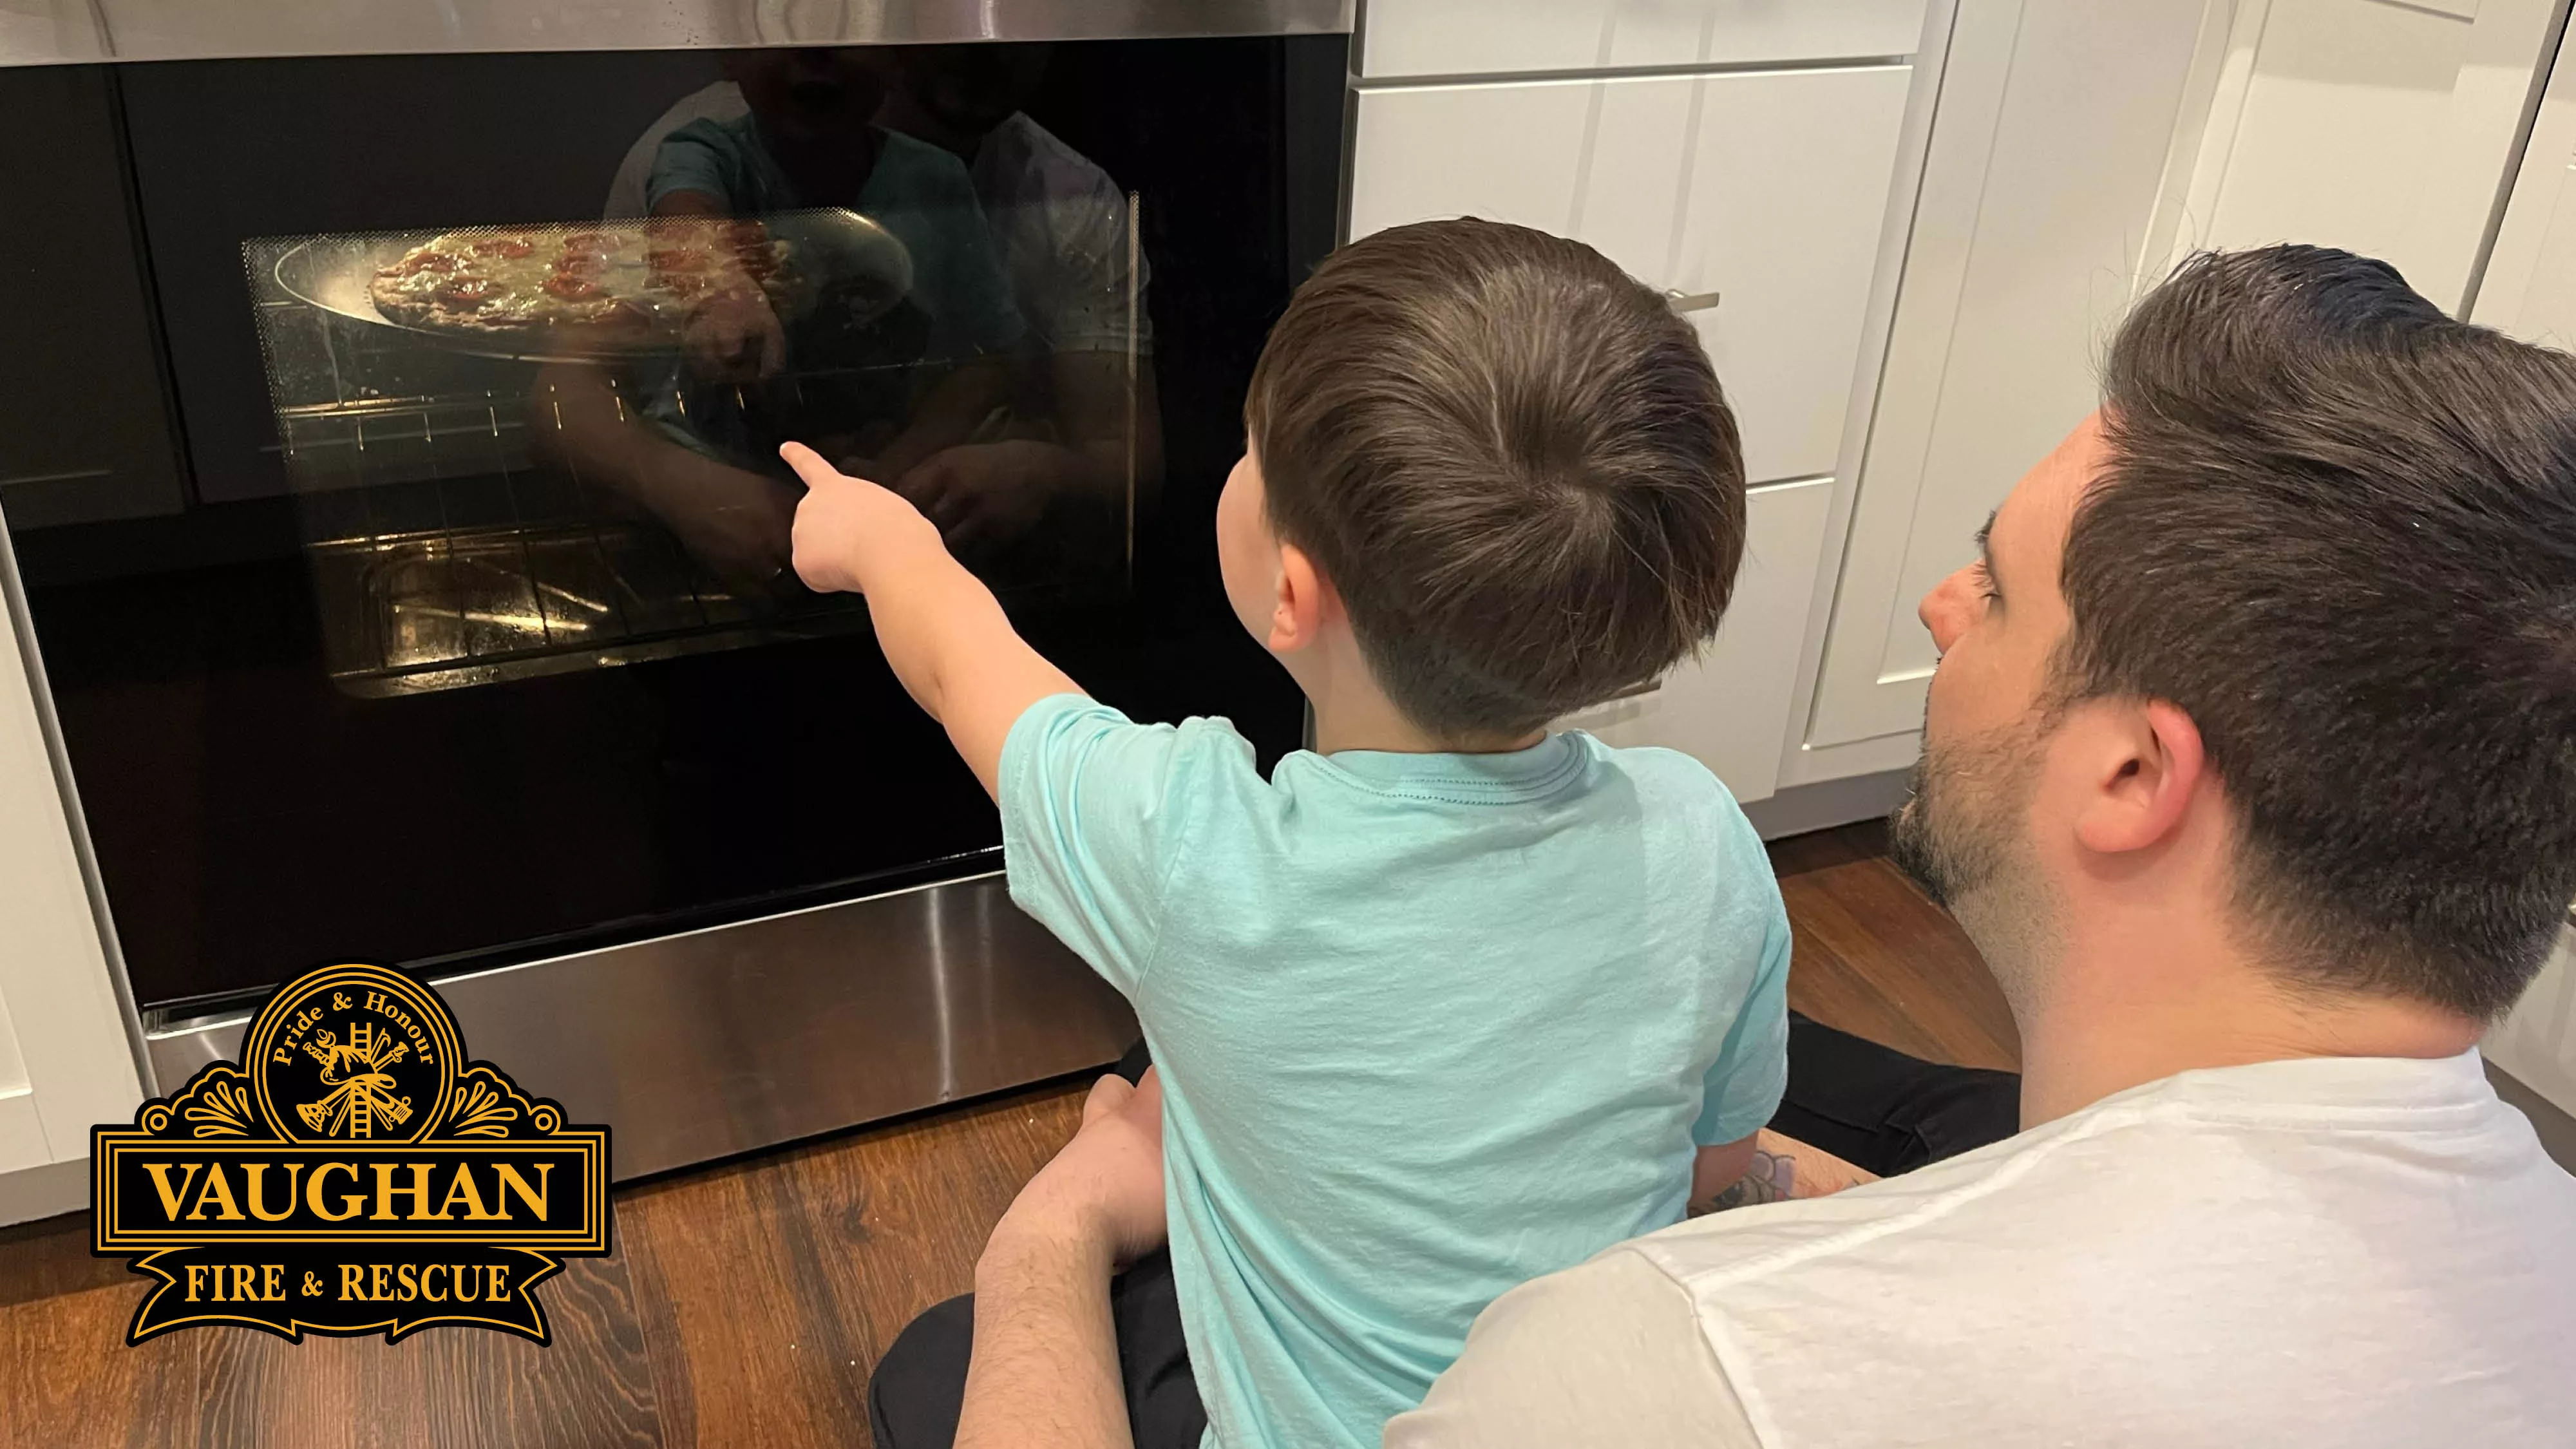 A man and a young boy watching a pizza cook in the oven. 